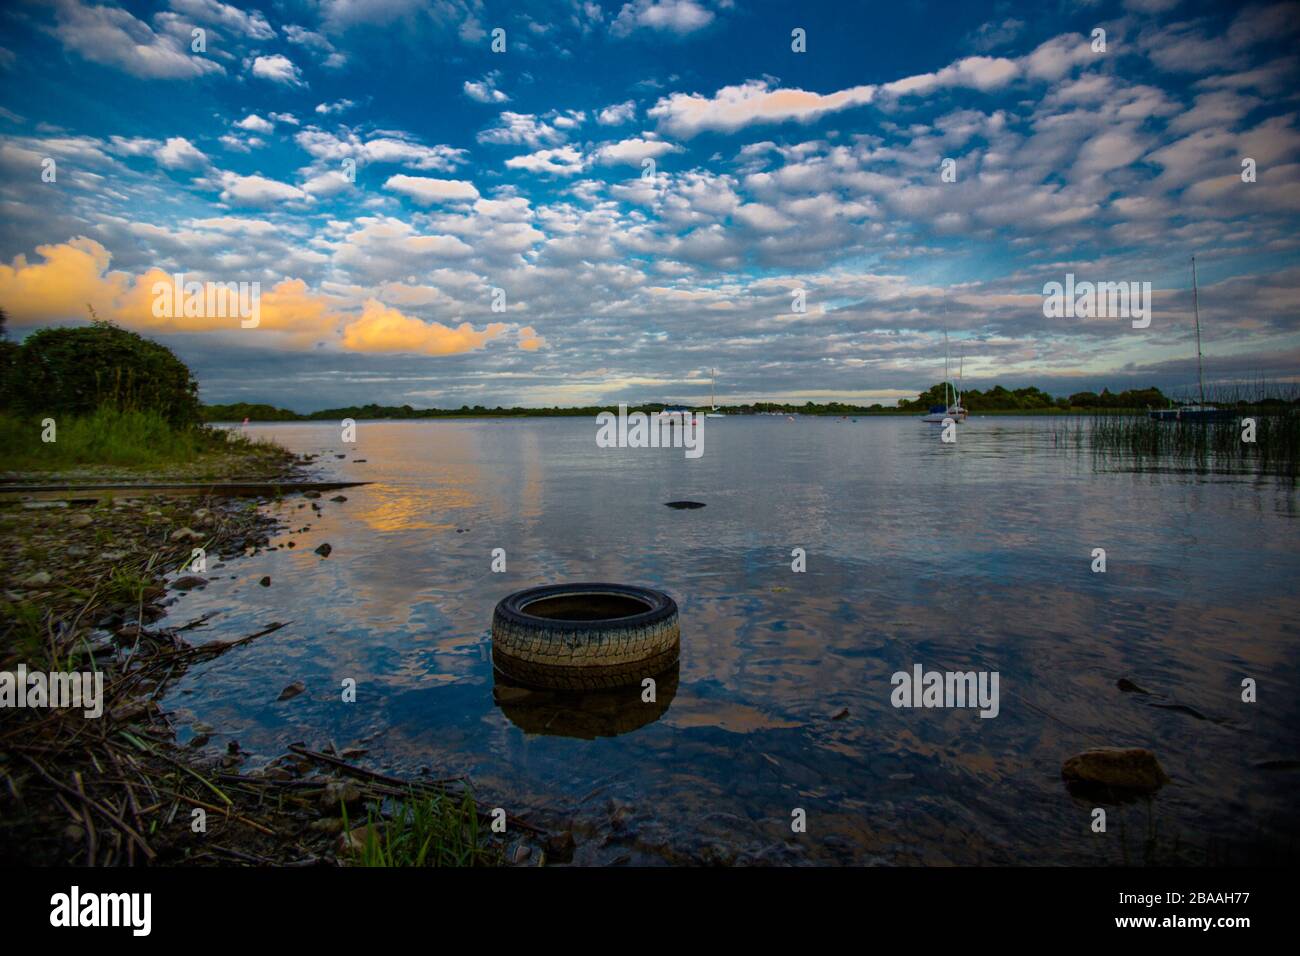 A rubber car tire sits in Lake Red, County Westmeath, Isolation as a symbol in Ireland. Stock Photo